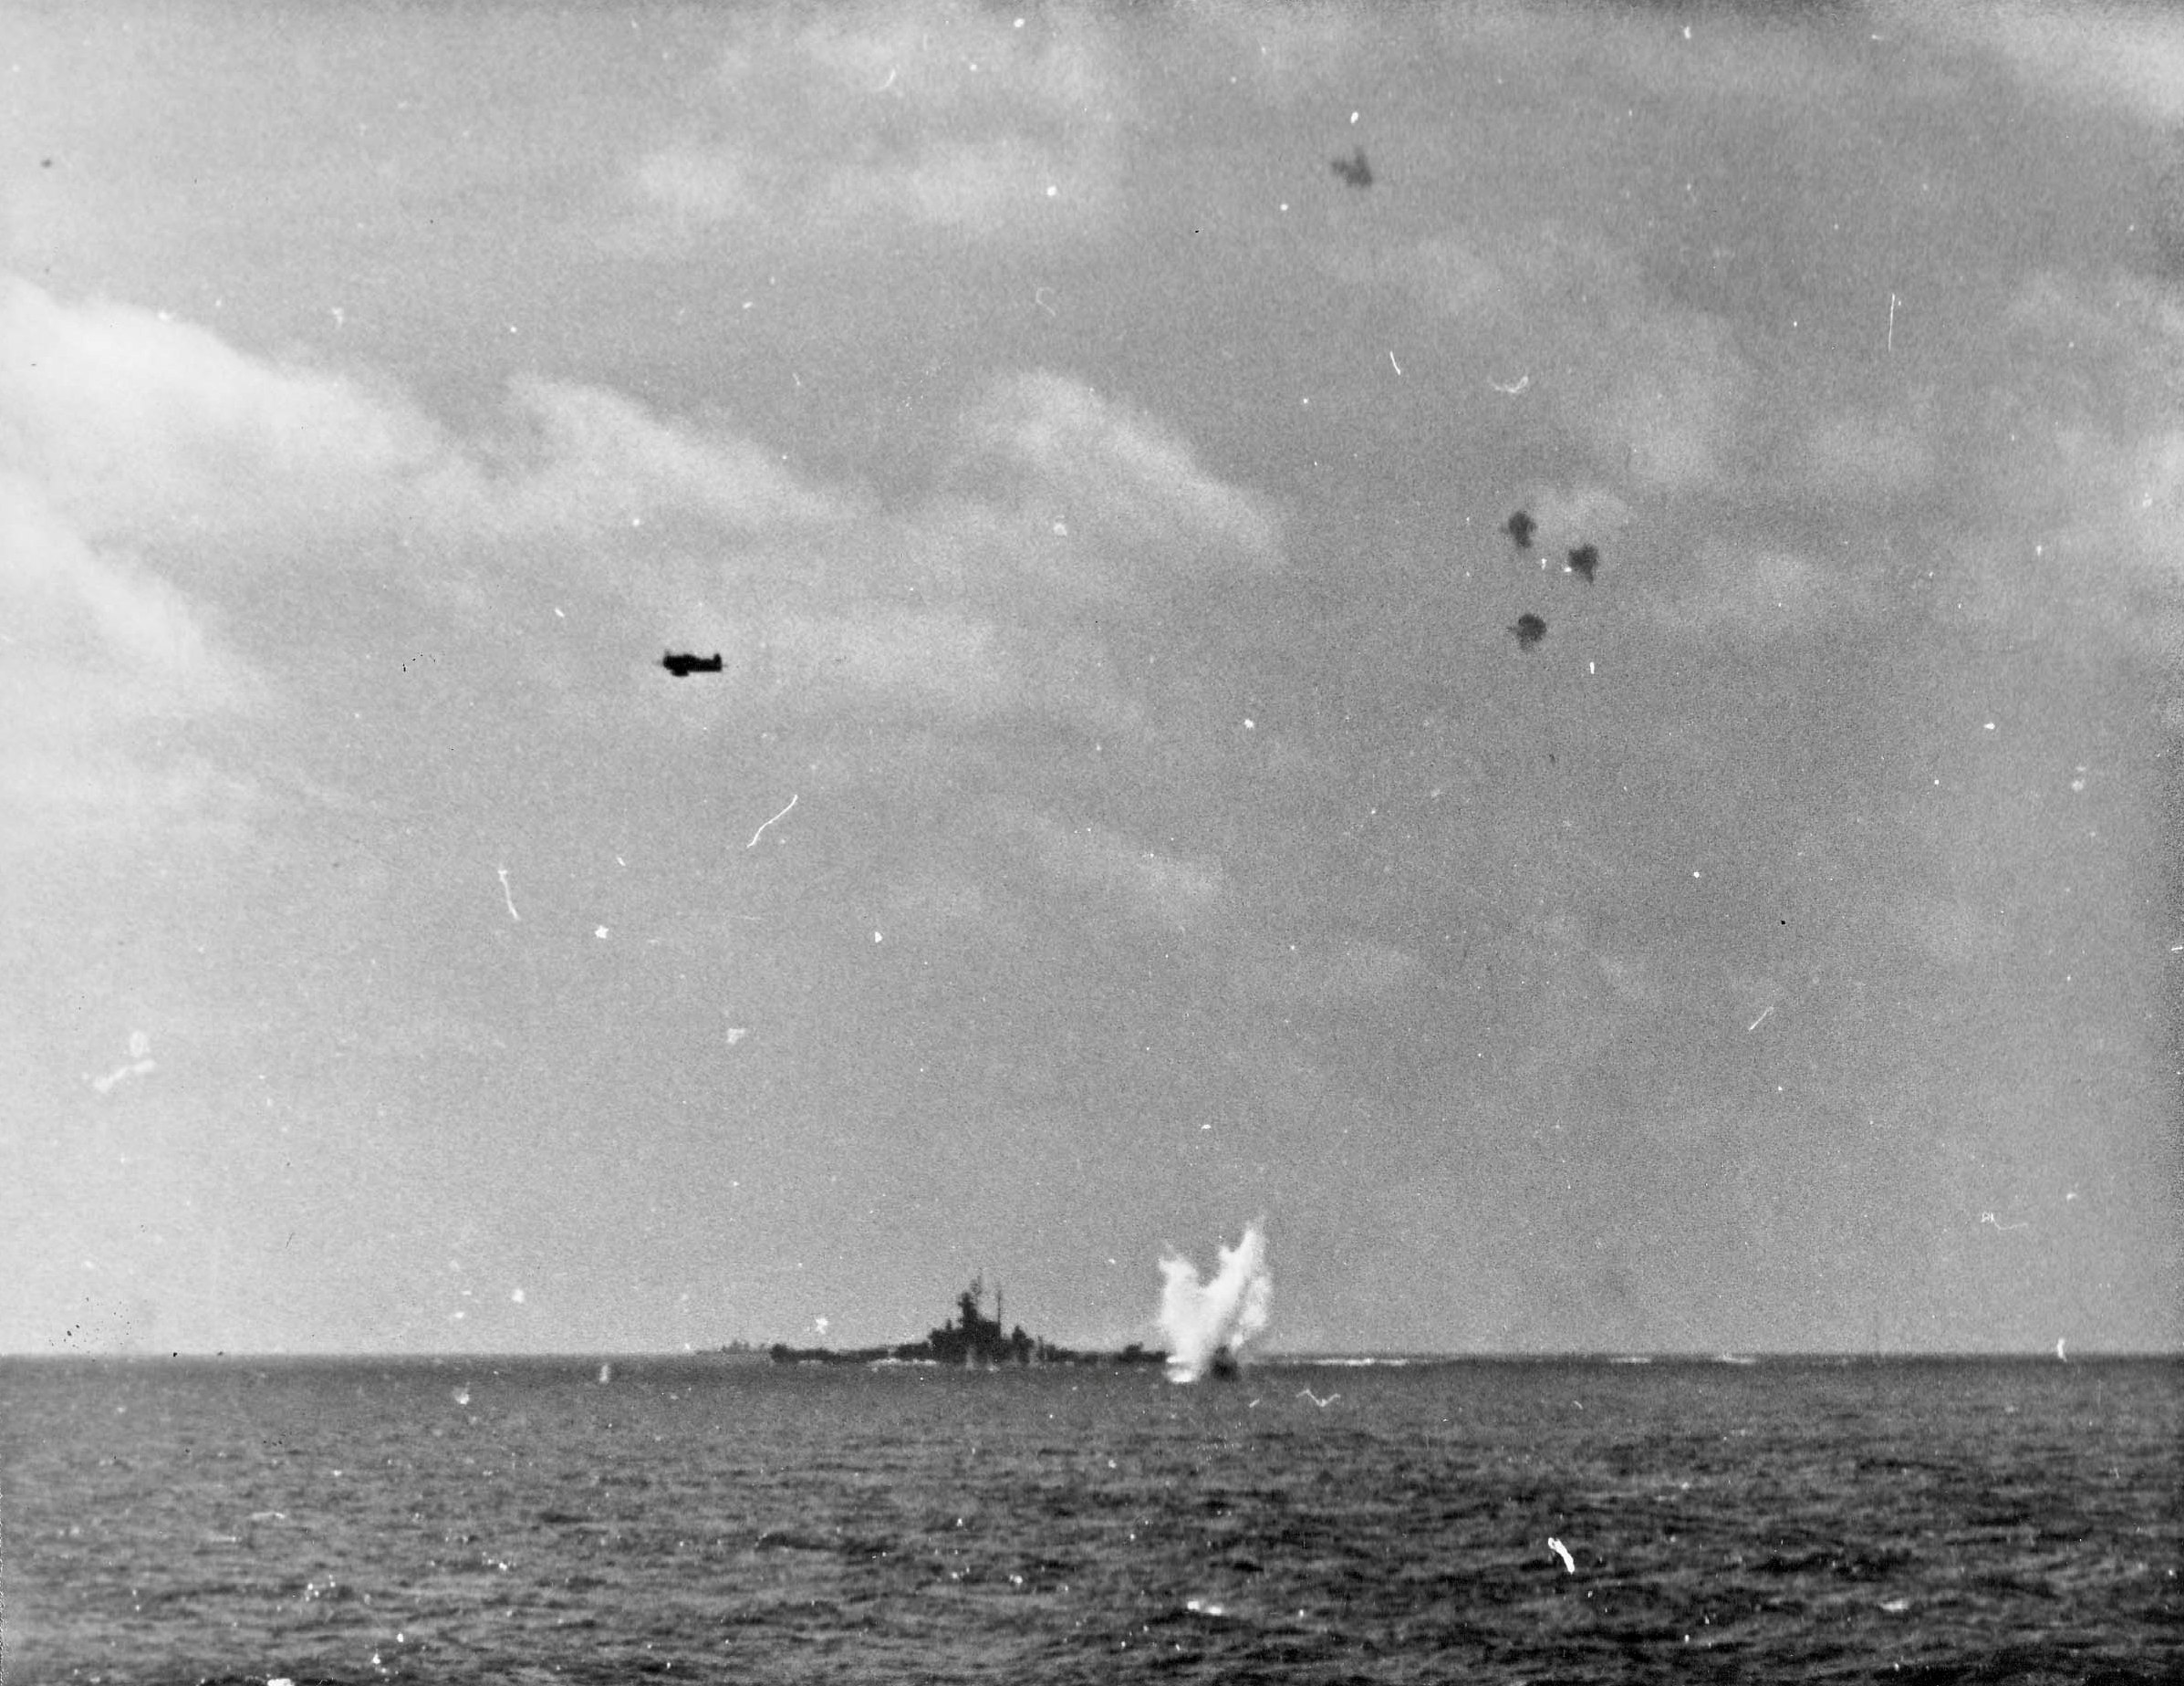 A Japanese D4Y Suisei fighter splashing into the sea after being shot down during an attack on the American fleet as seen from USS Essex, 25 Nov 1944. Note battleship USS South Dakota and US fighter in level flight